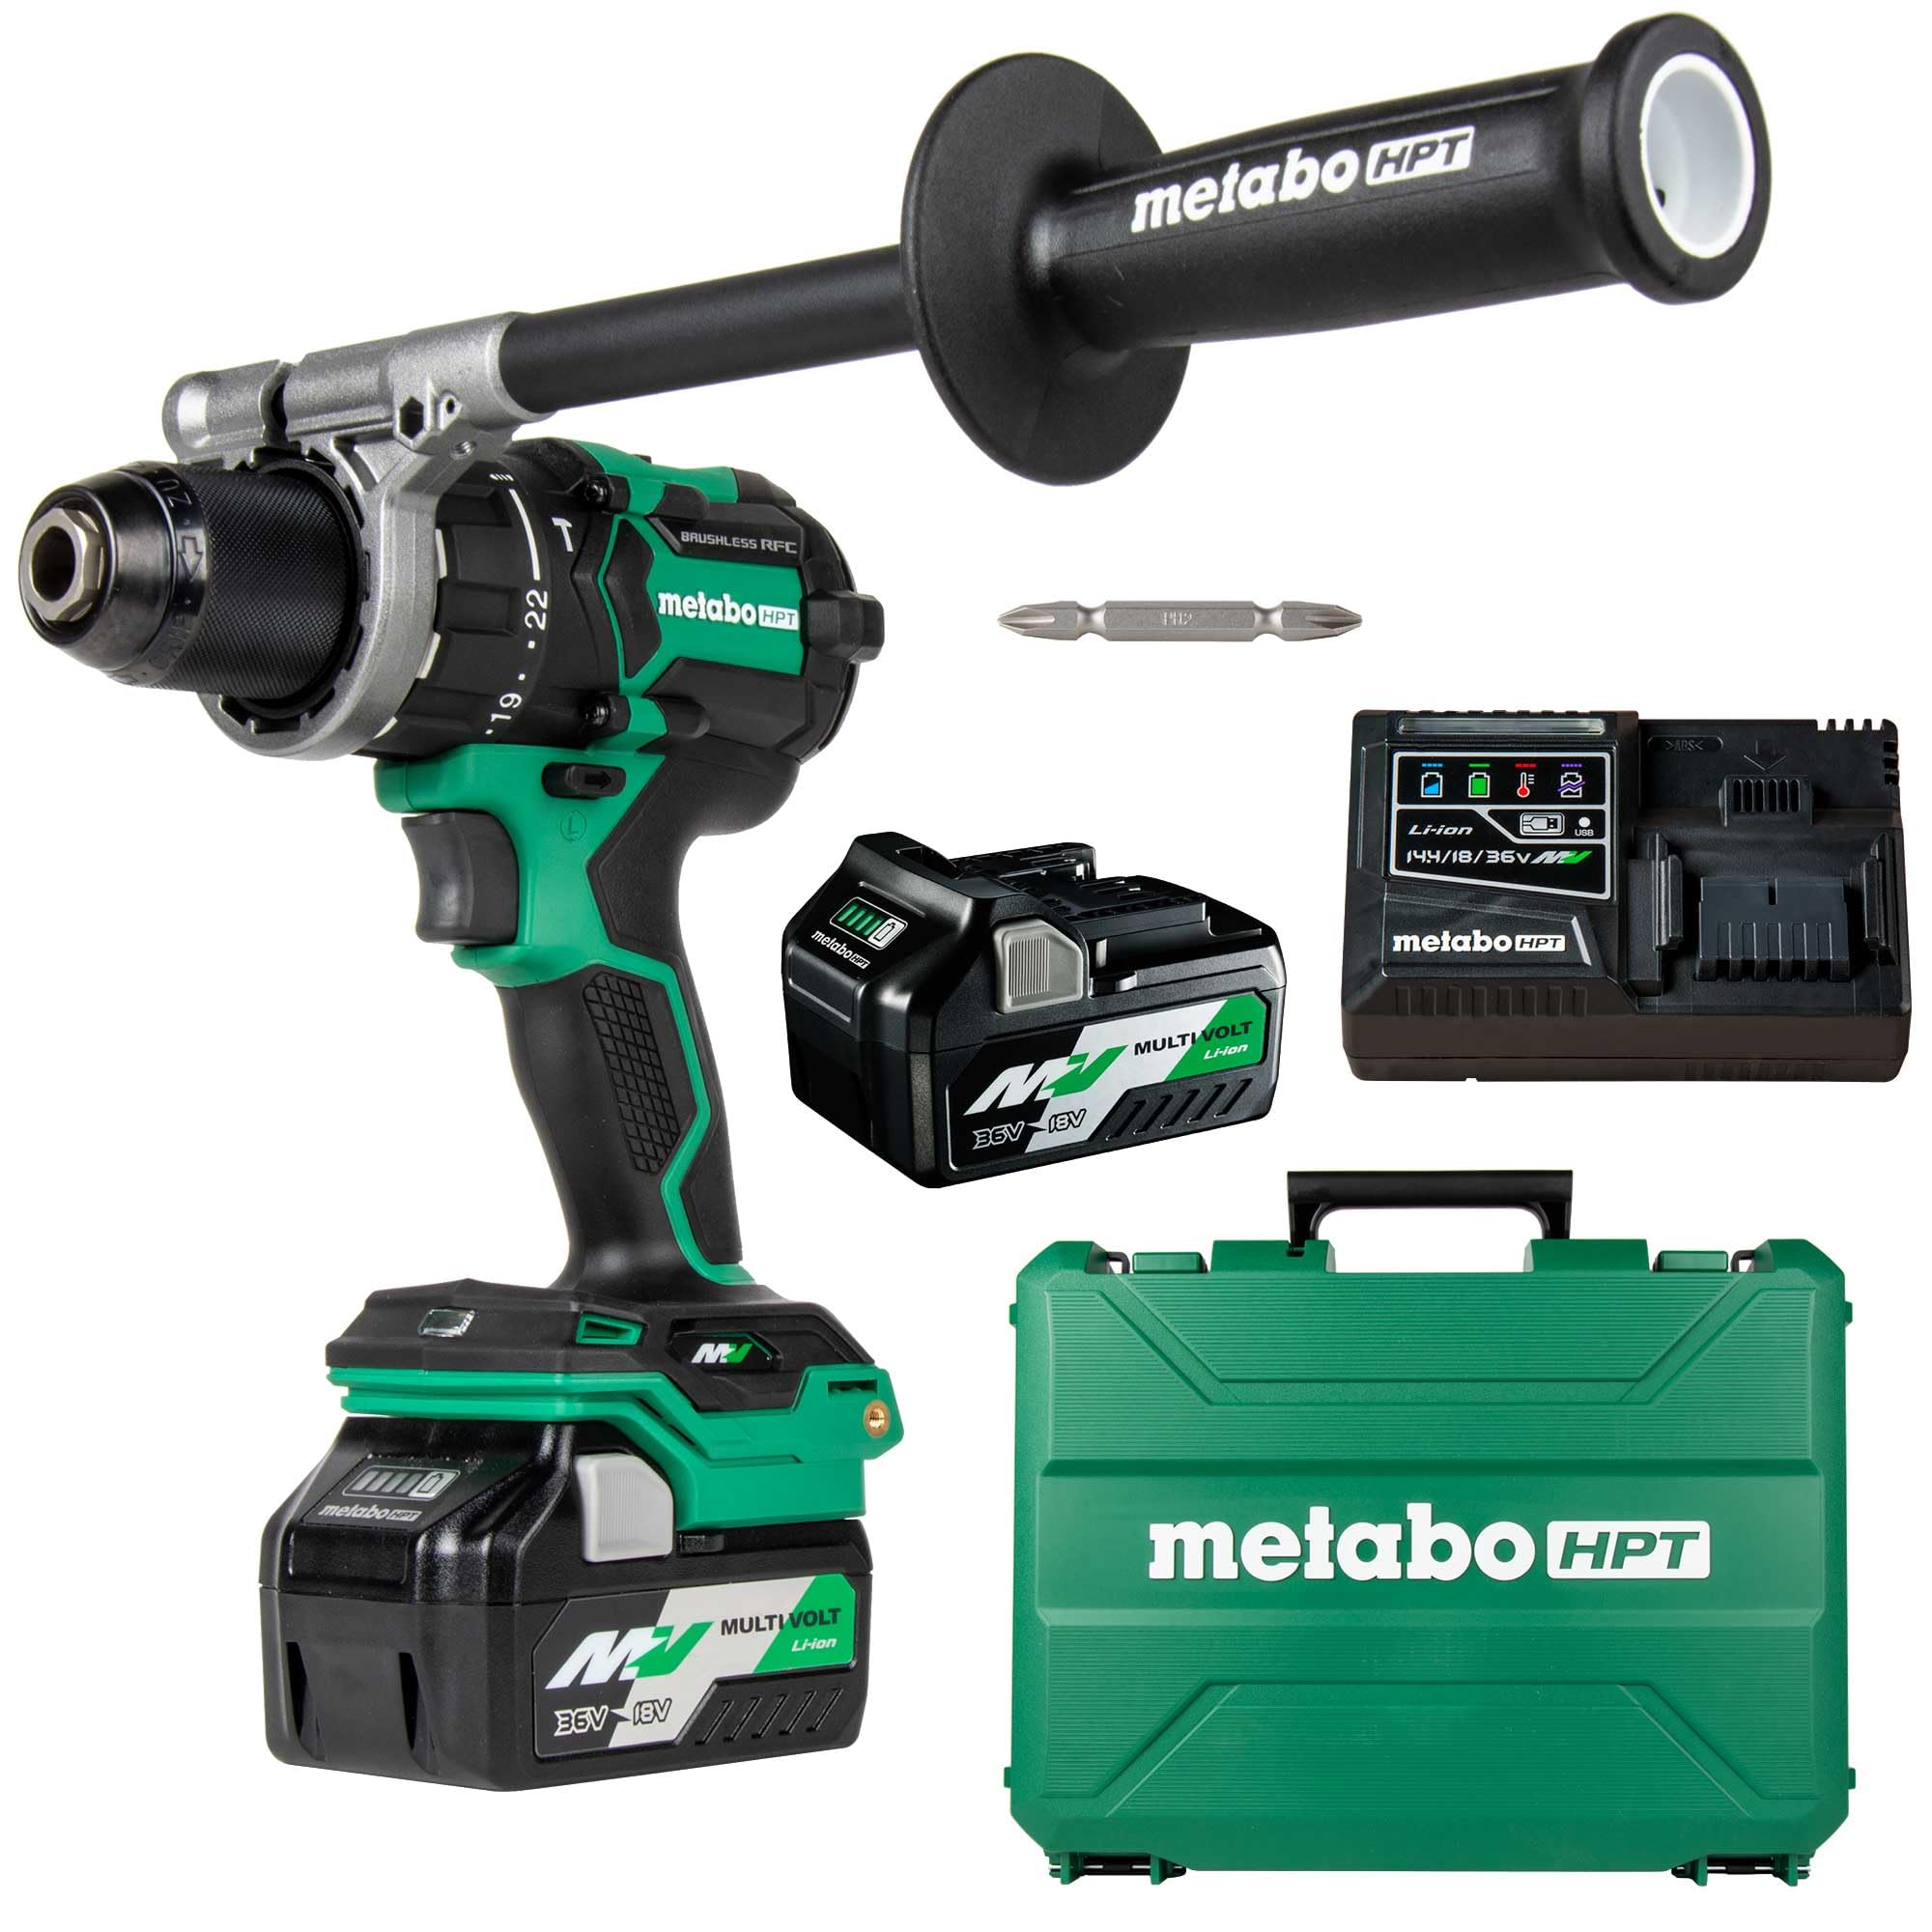 Metabo HPT 36V MultiVolt™ Cordless ½-Inch Hammer Drill Kit | 1,400 in-lbs. Max Torque | Reactive Force Control | Optional AC Adapter | DV36DC